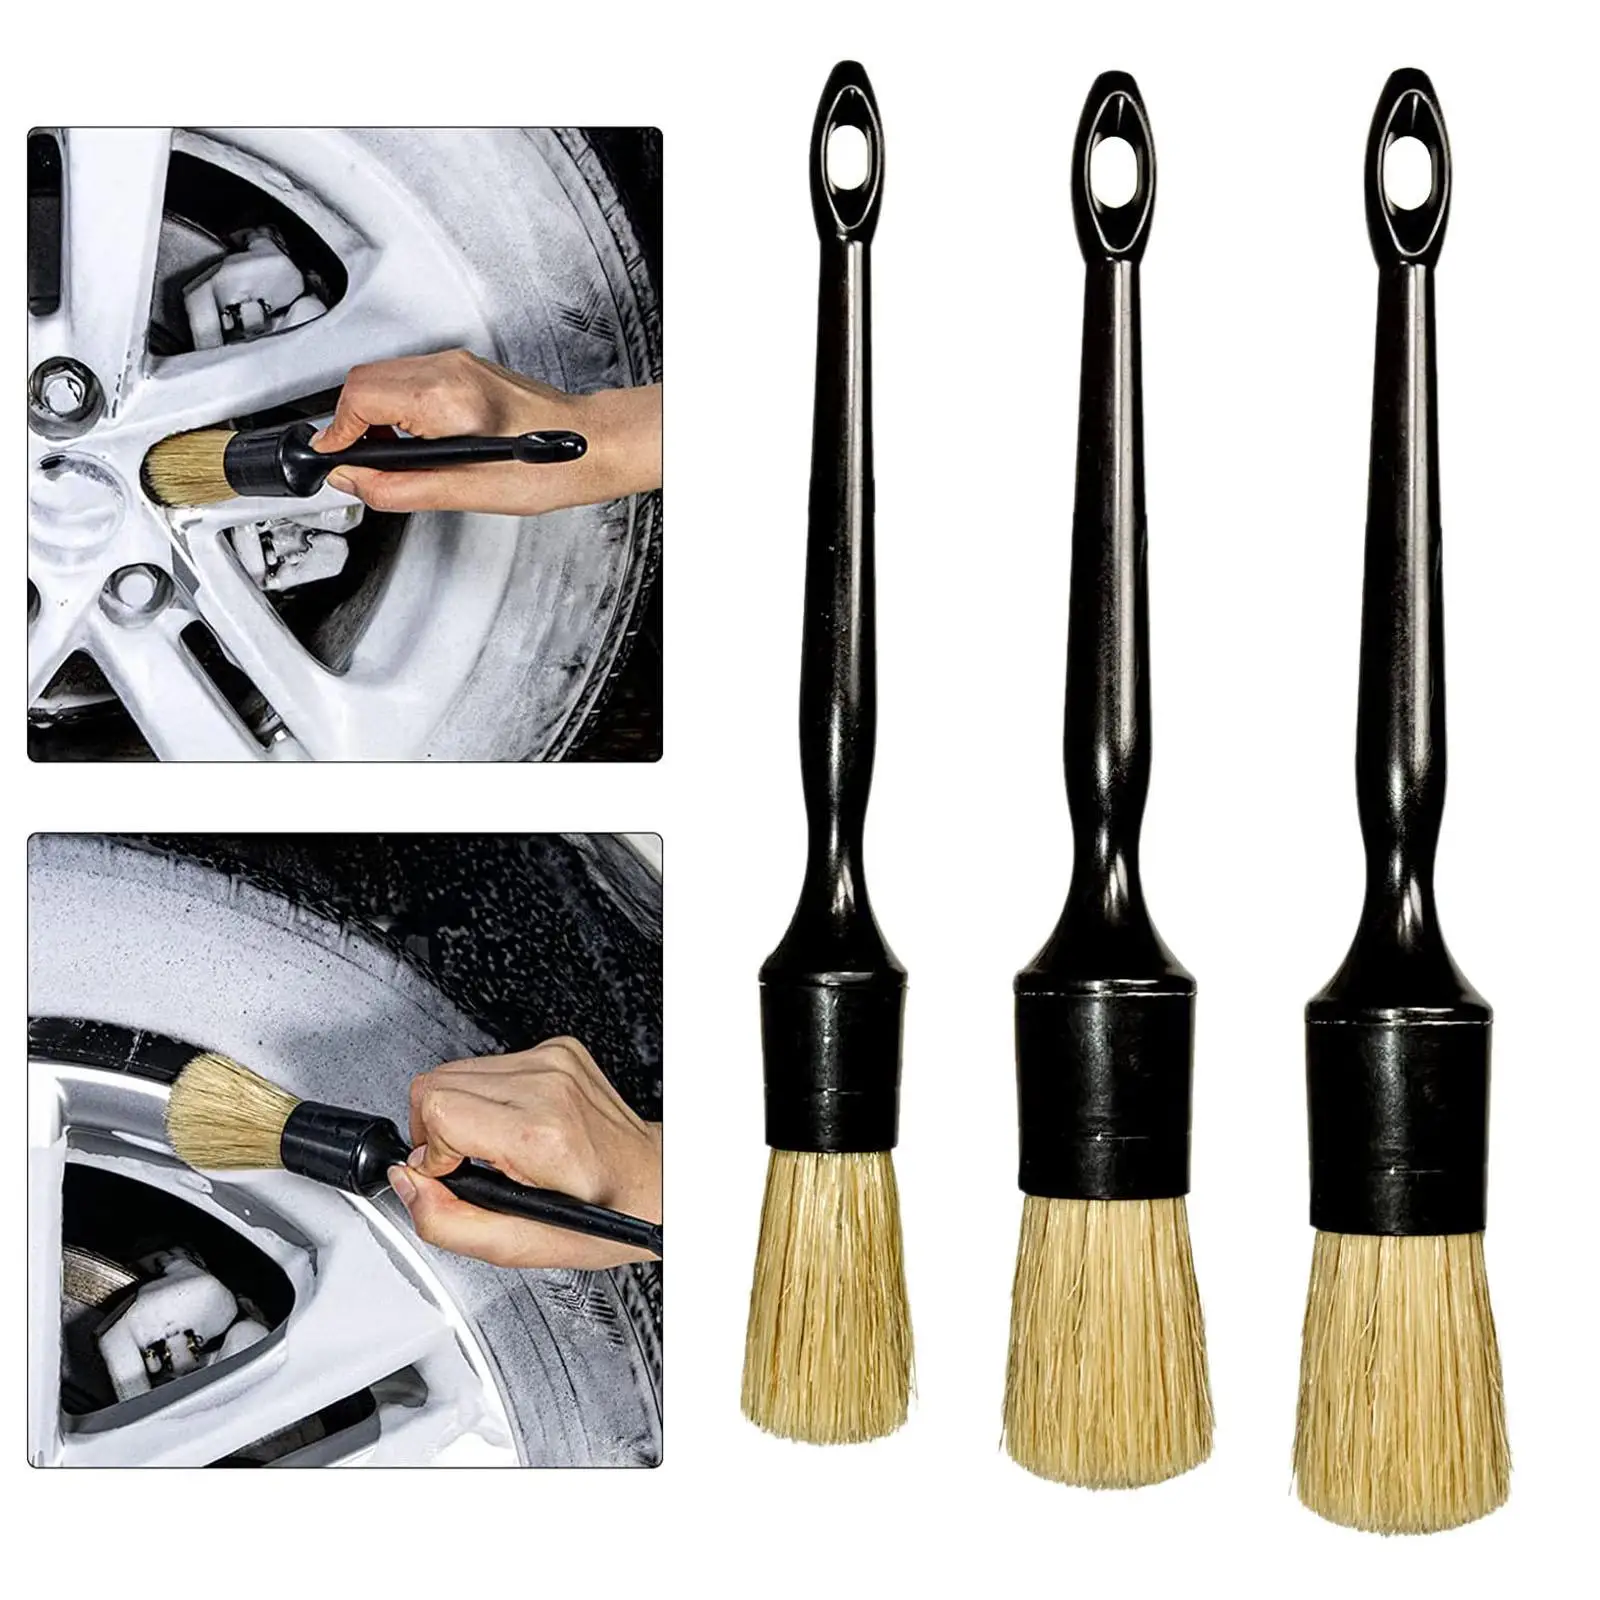 3Pcs Auto Detail Brush Set Different Size Detail Cleaner Brushes for Wheel Upholstery Lug Nut Cleaning Engine Seat